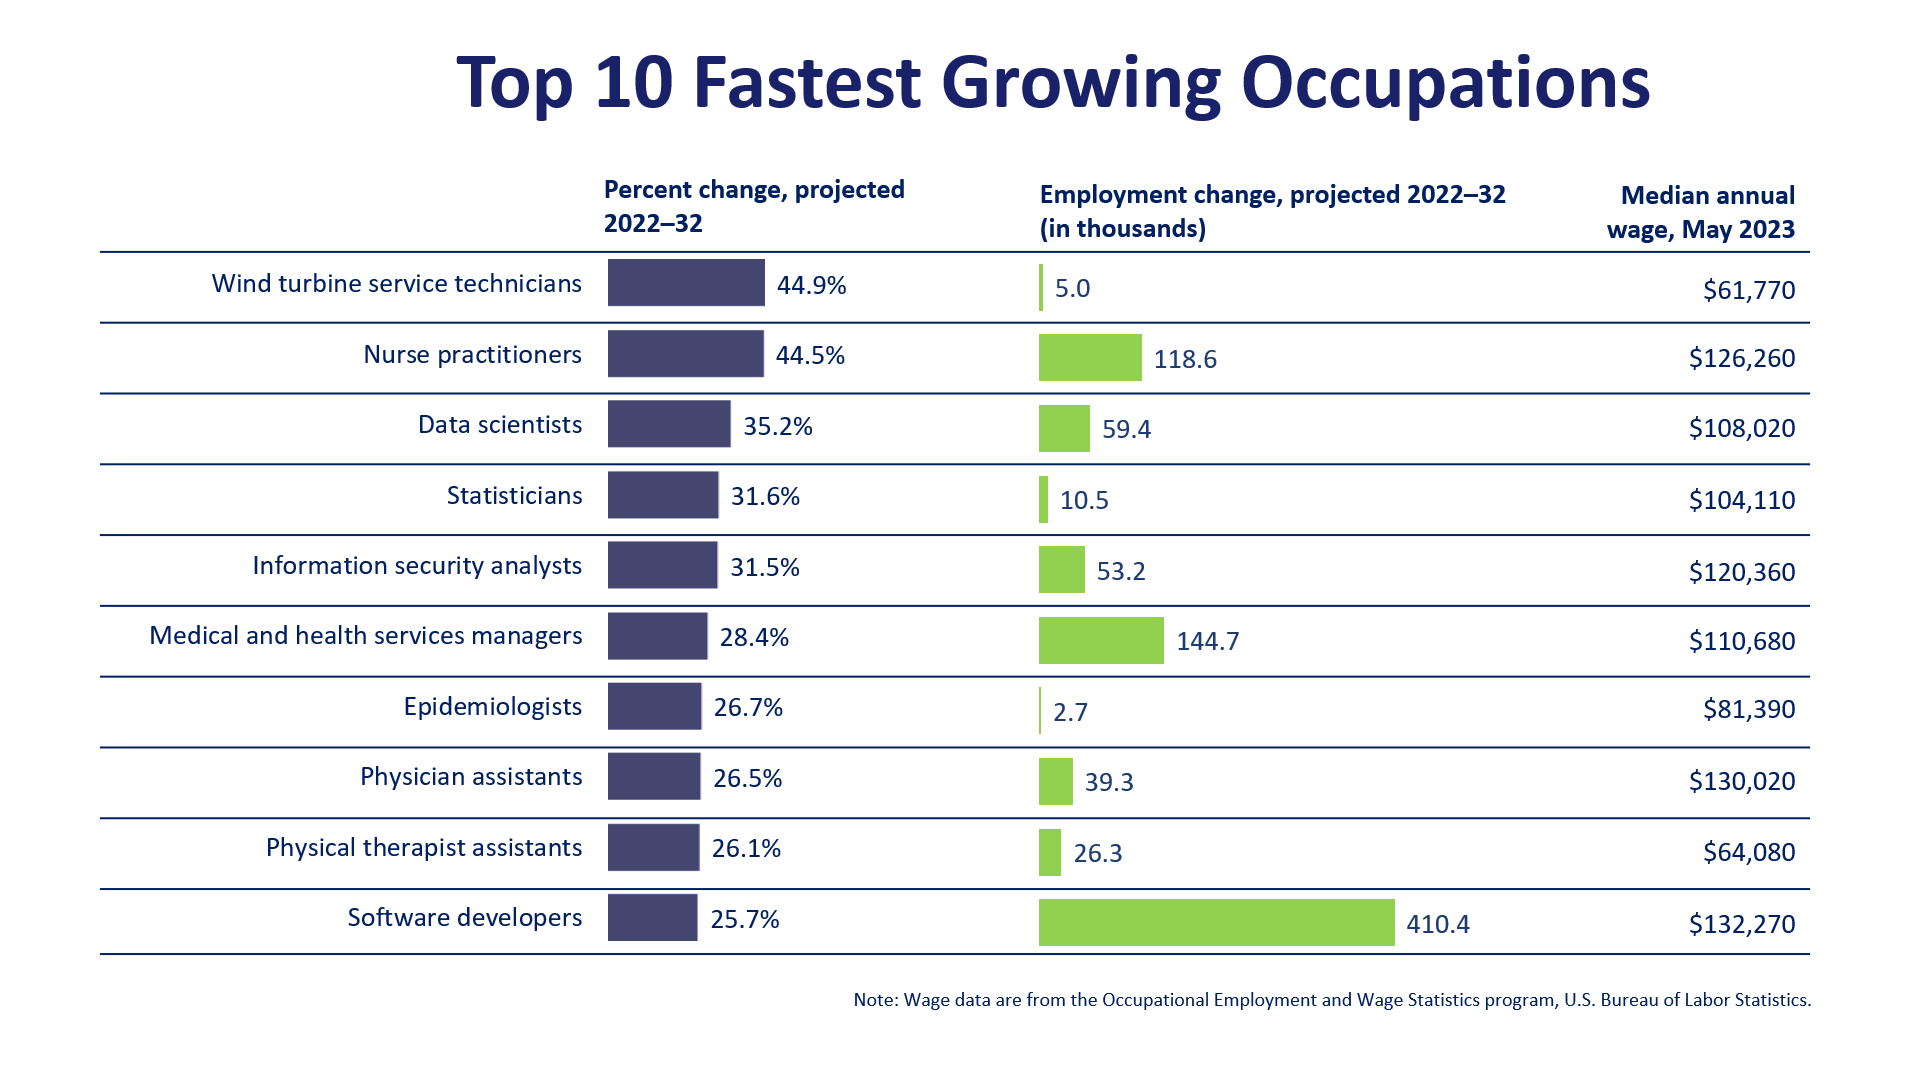 Top 10 fastest growing occupations, excluding pandemic recovery